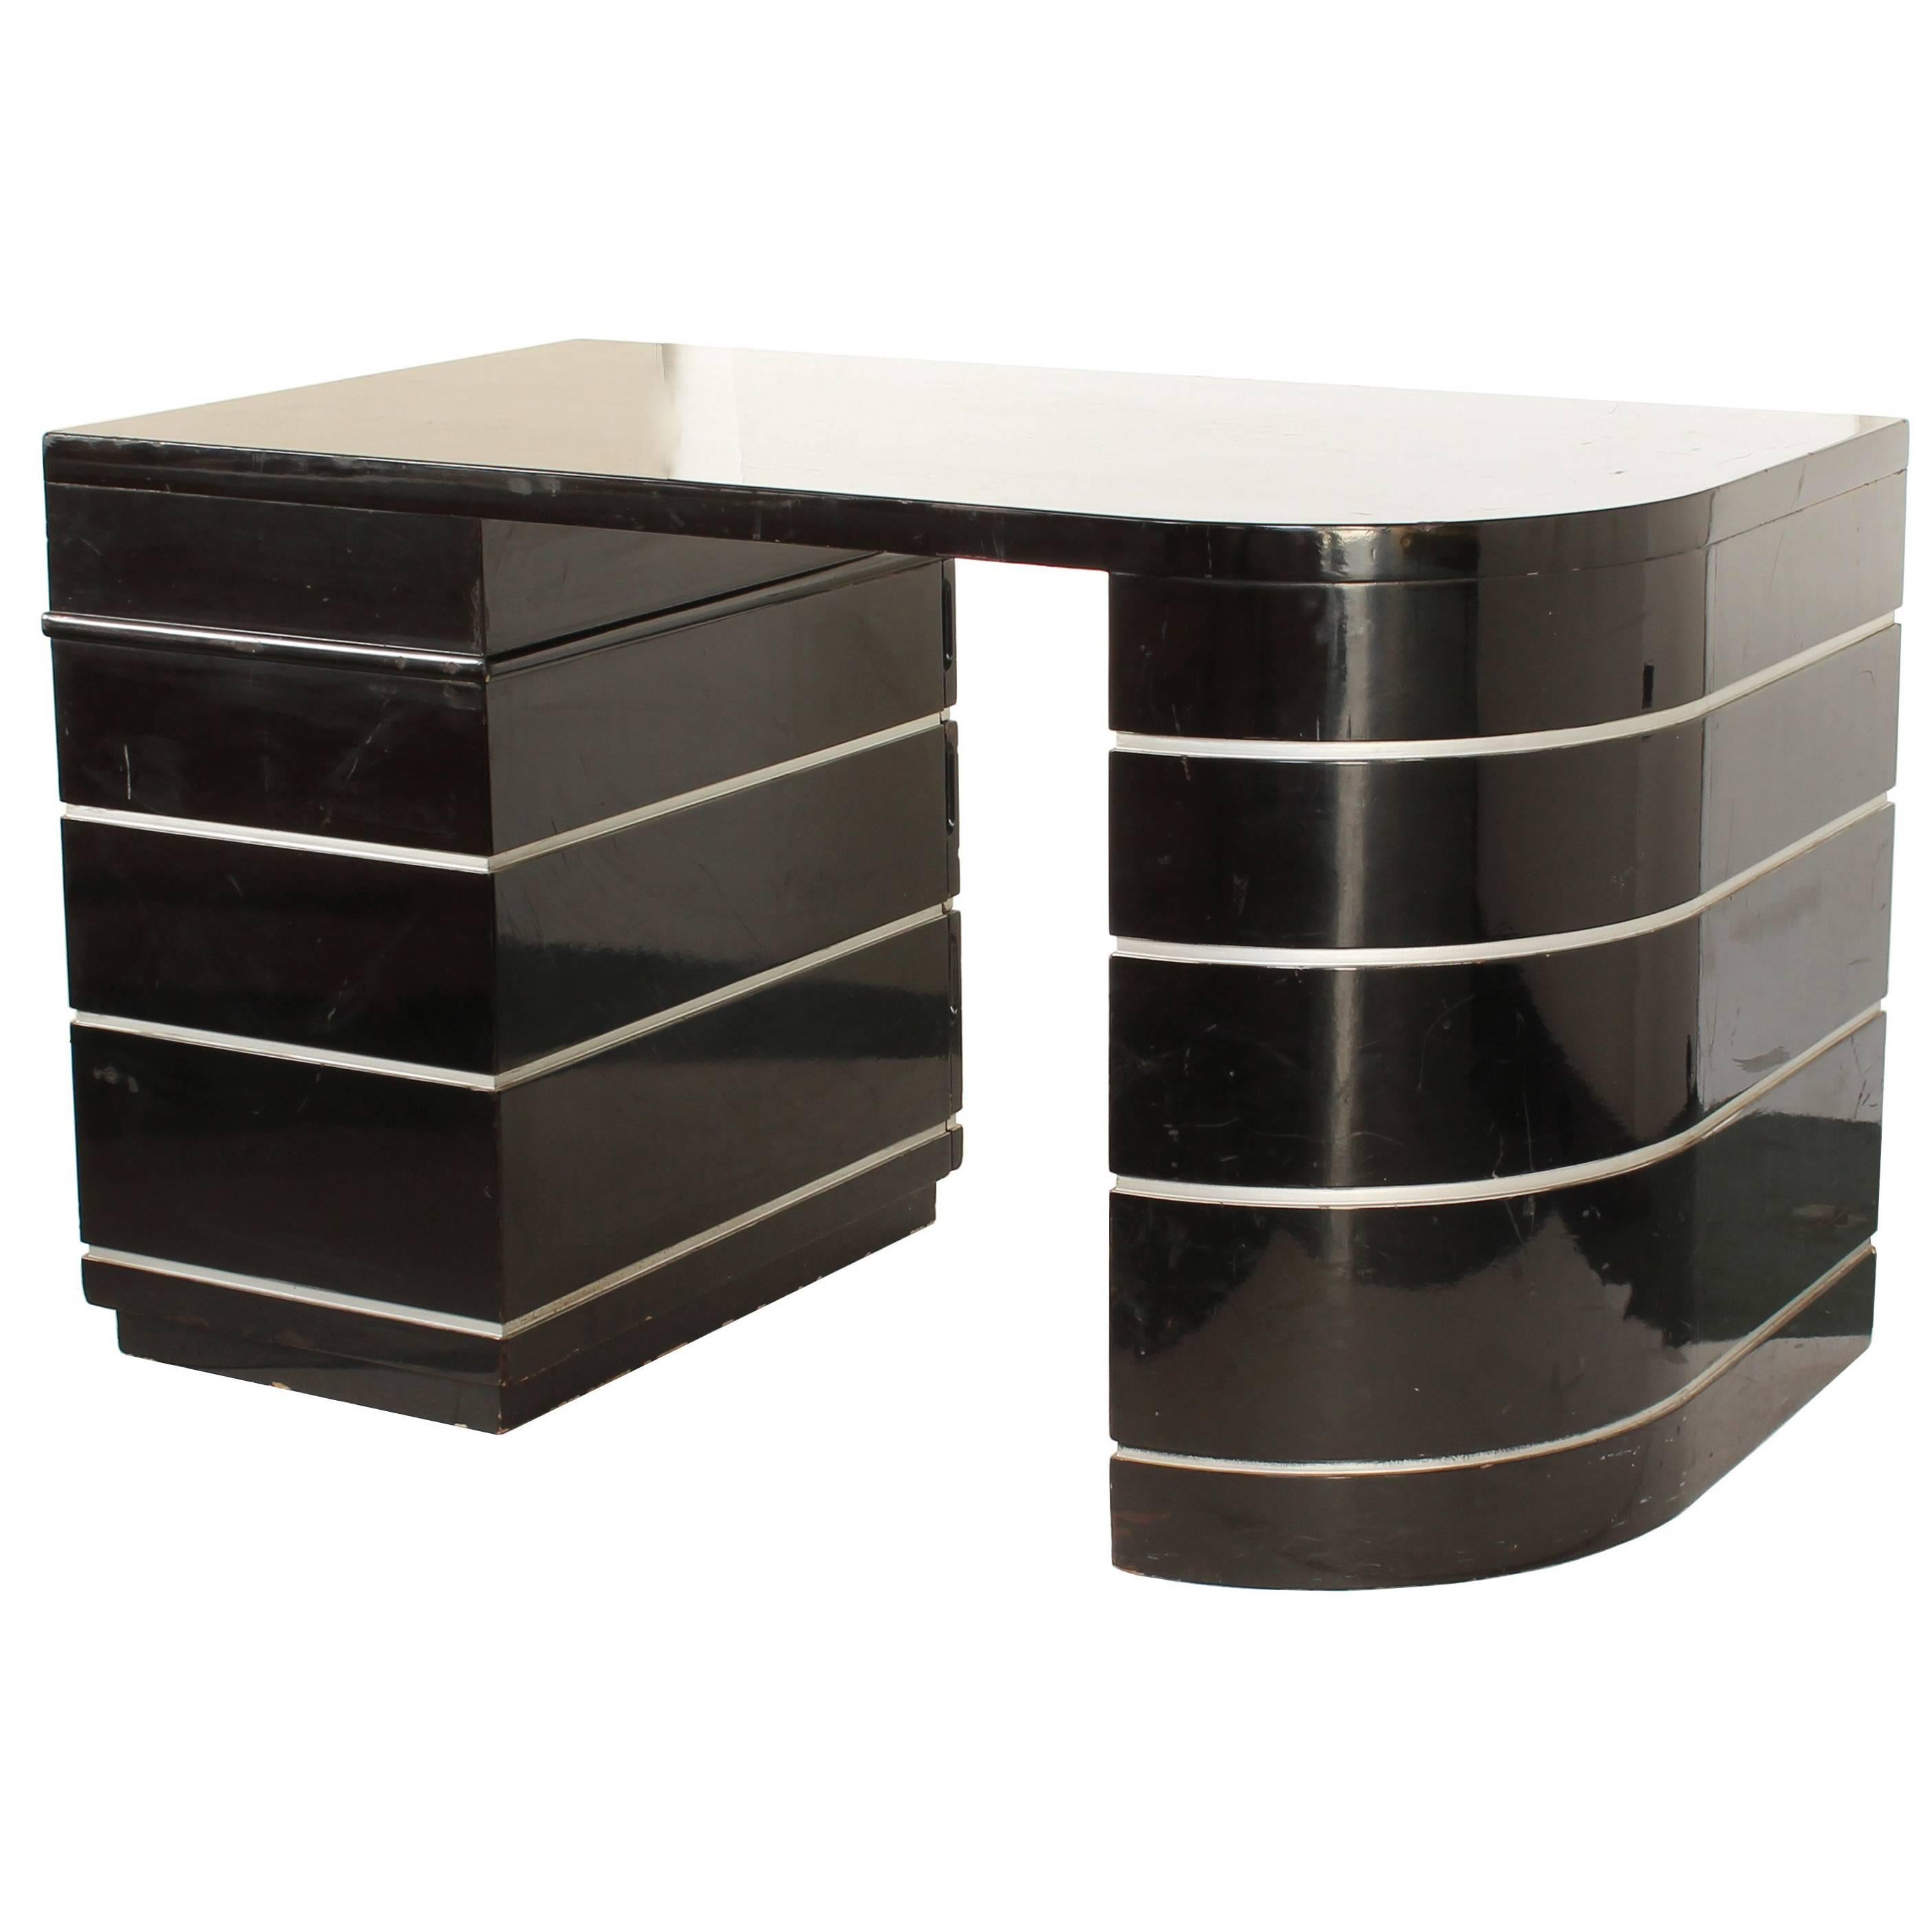 Paul Frankl Attr. Art Deco Curved Desk Black Lacquer Silver Grooves with Drawers For Sale